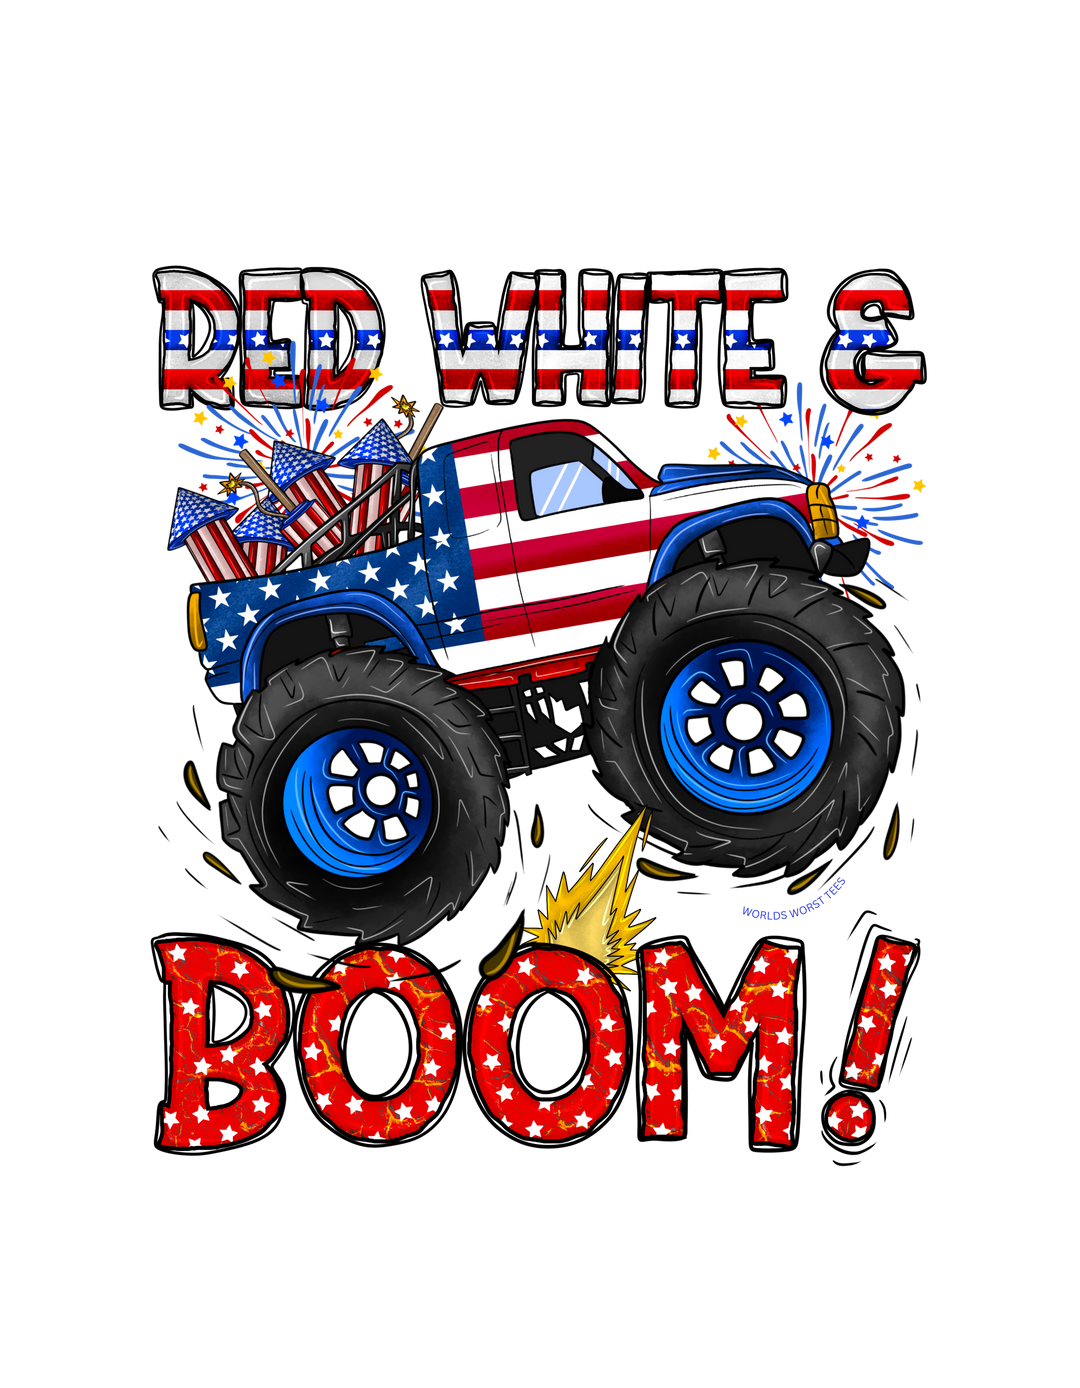 A toddler tee featuring a truck with a flag design, perfect for sensitive skin. Made of 100% combed ringspun cotton, light fabric, tear-away label, and a classic fit. Red White and Boom Toddler Tee by Worlds Worst Tees.